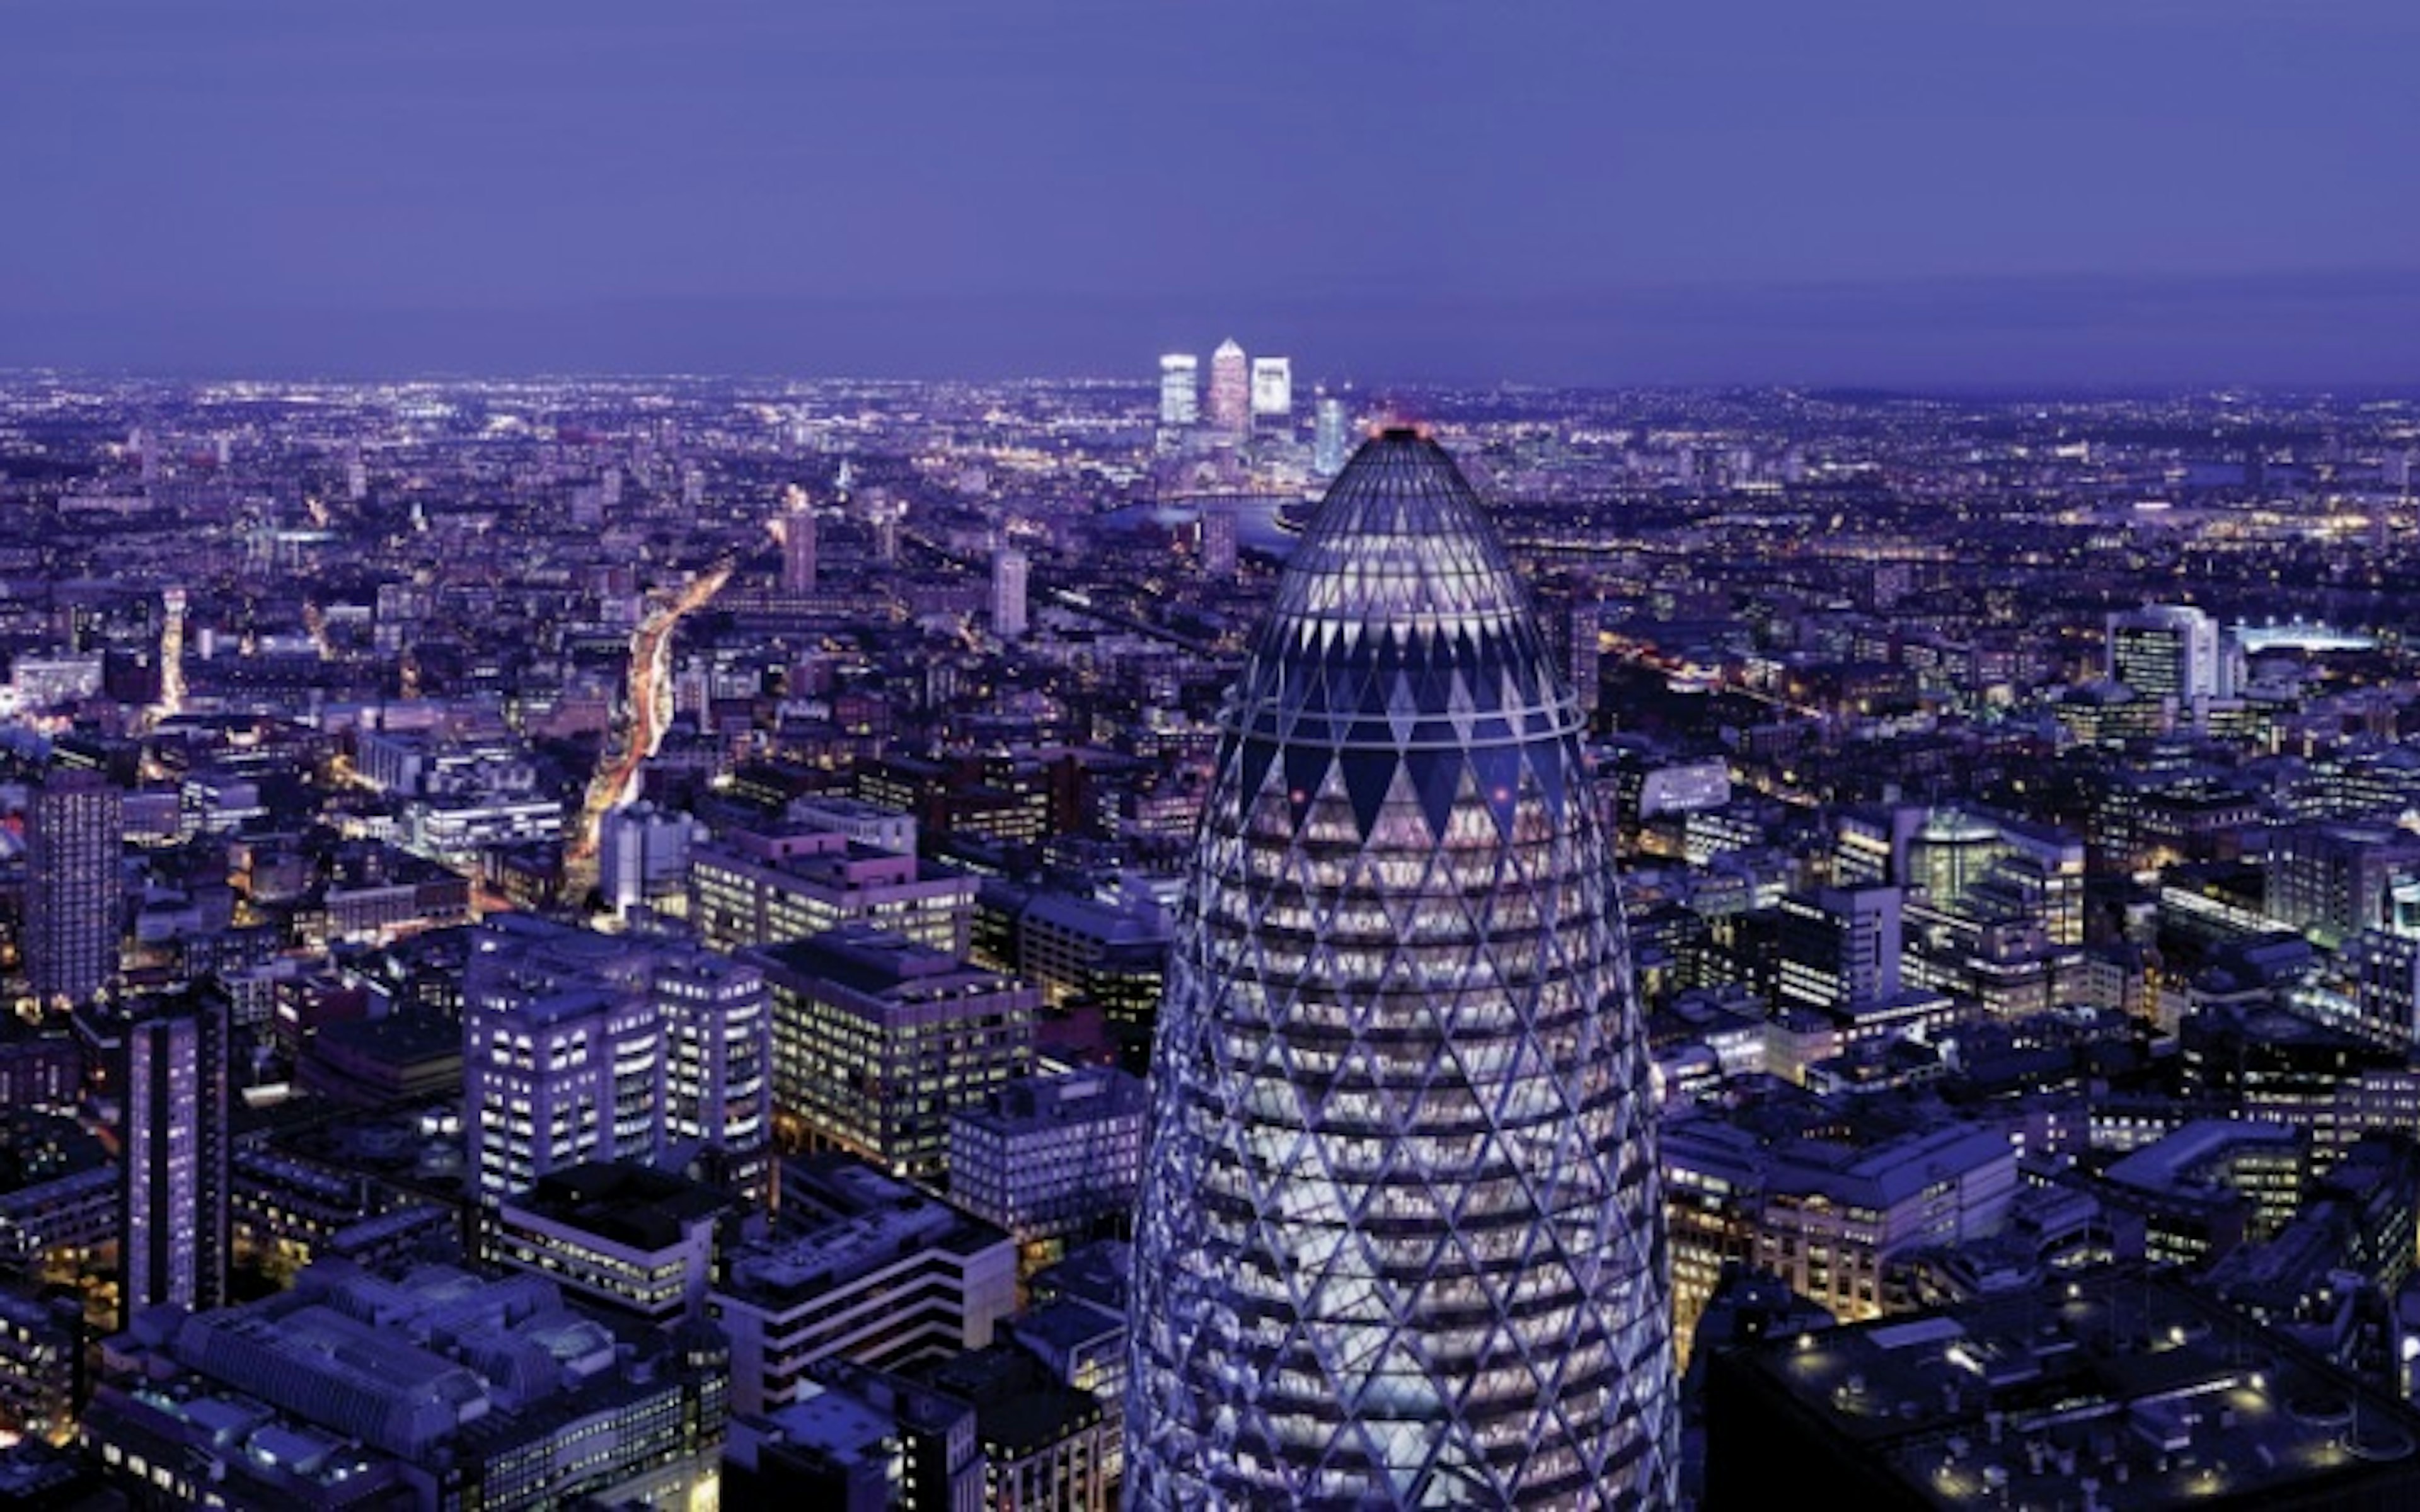 Searcys at the Gherkin - image